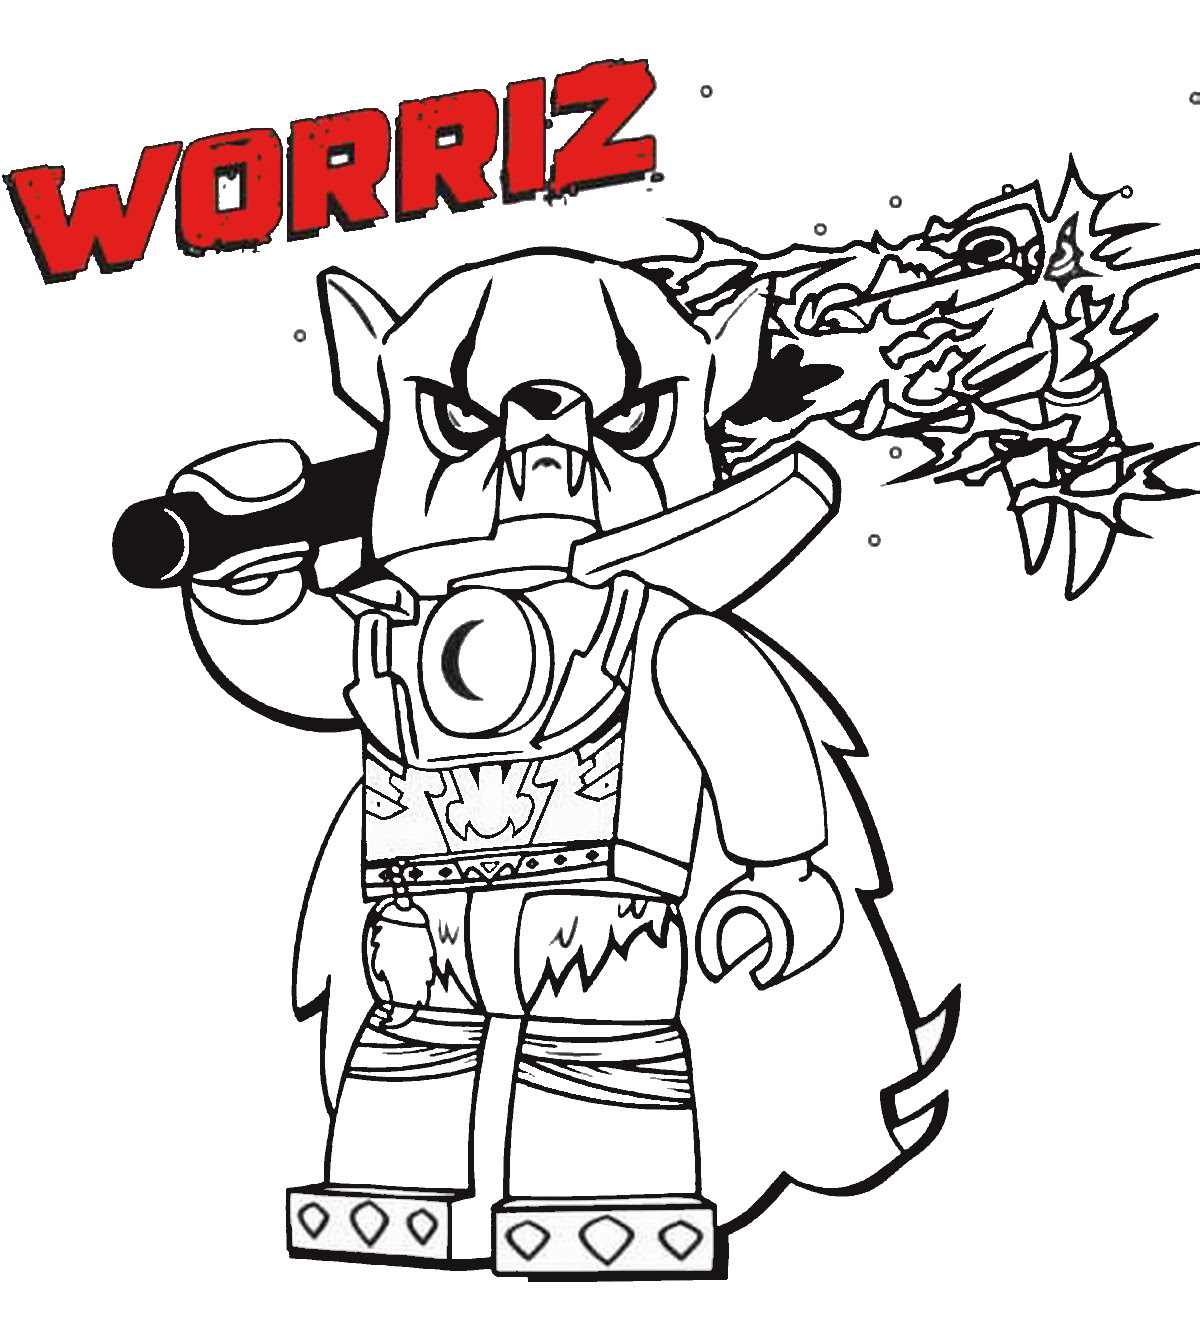 Download Awesome Free Lego Chima Coloring Pages | Top Free Printable Coloring Pages for All